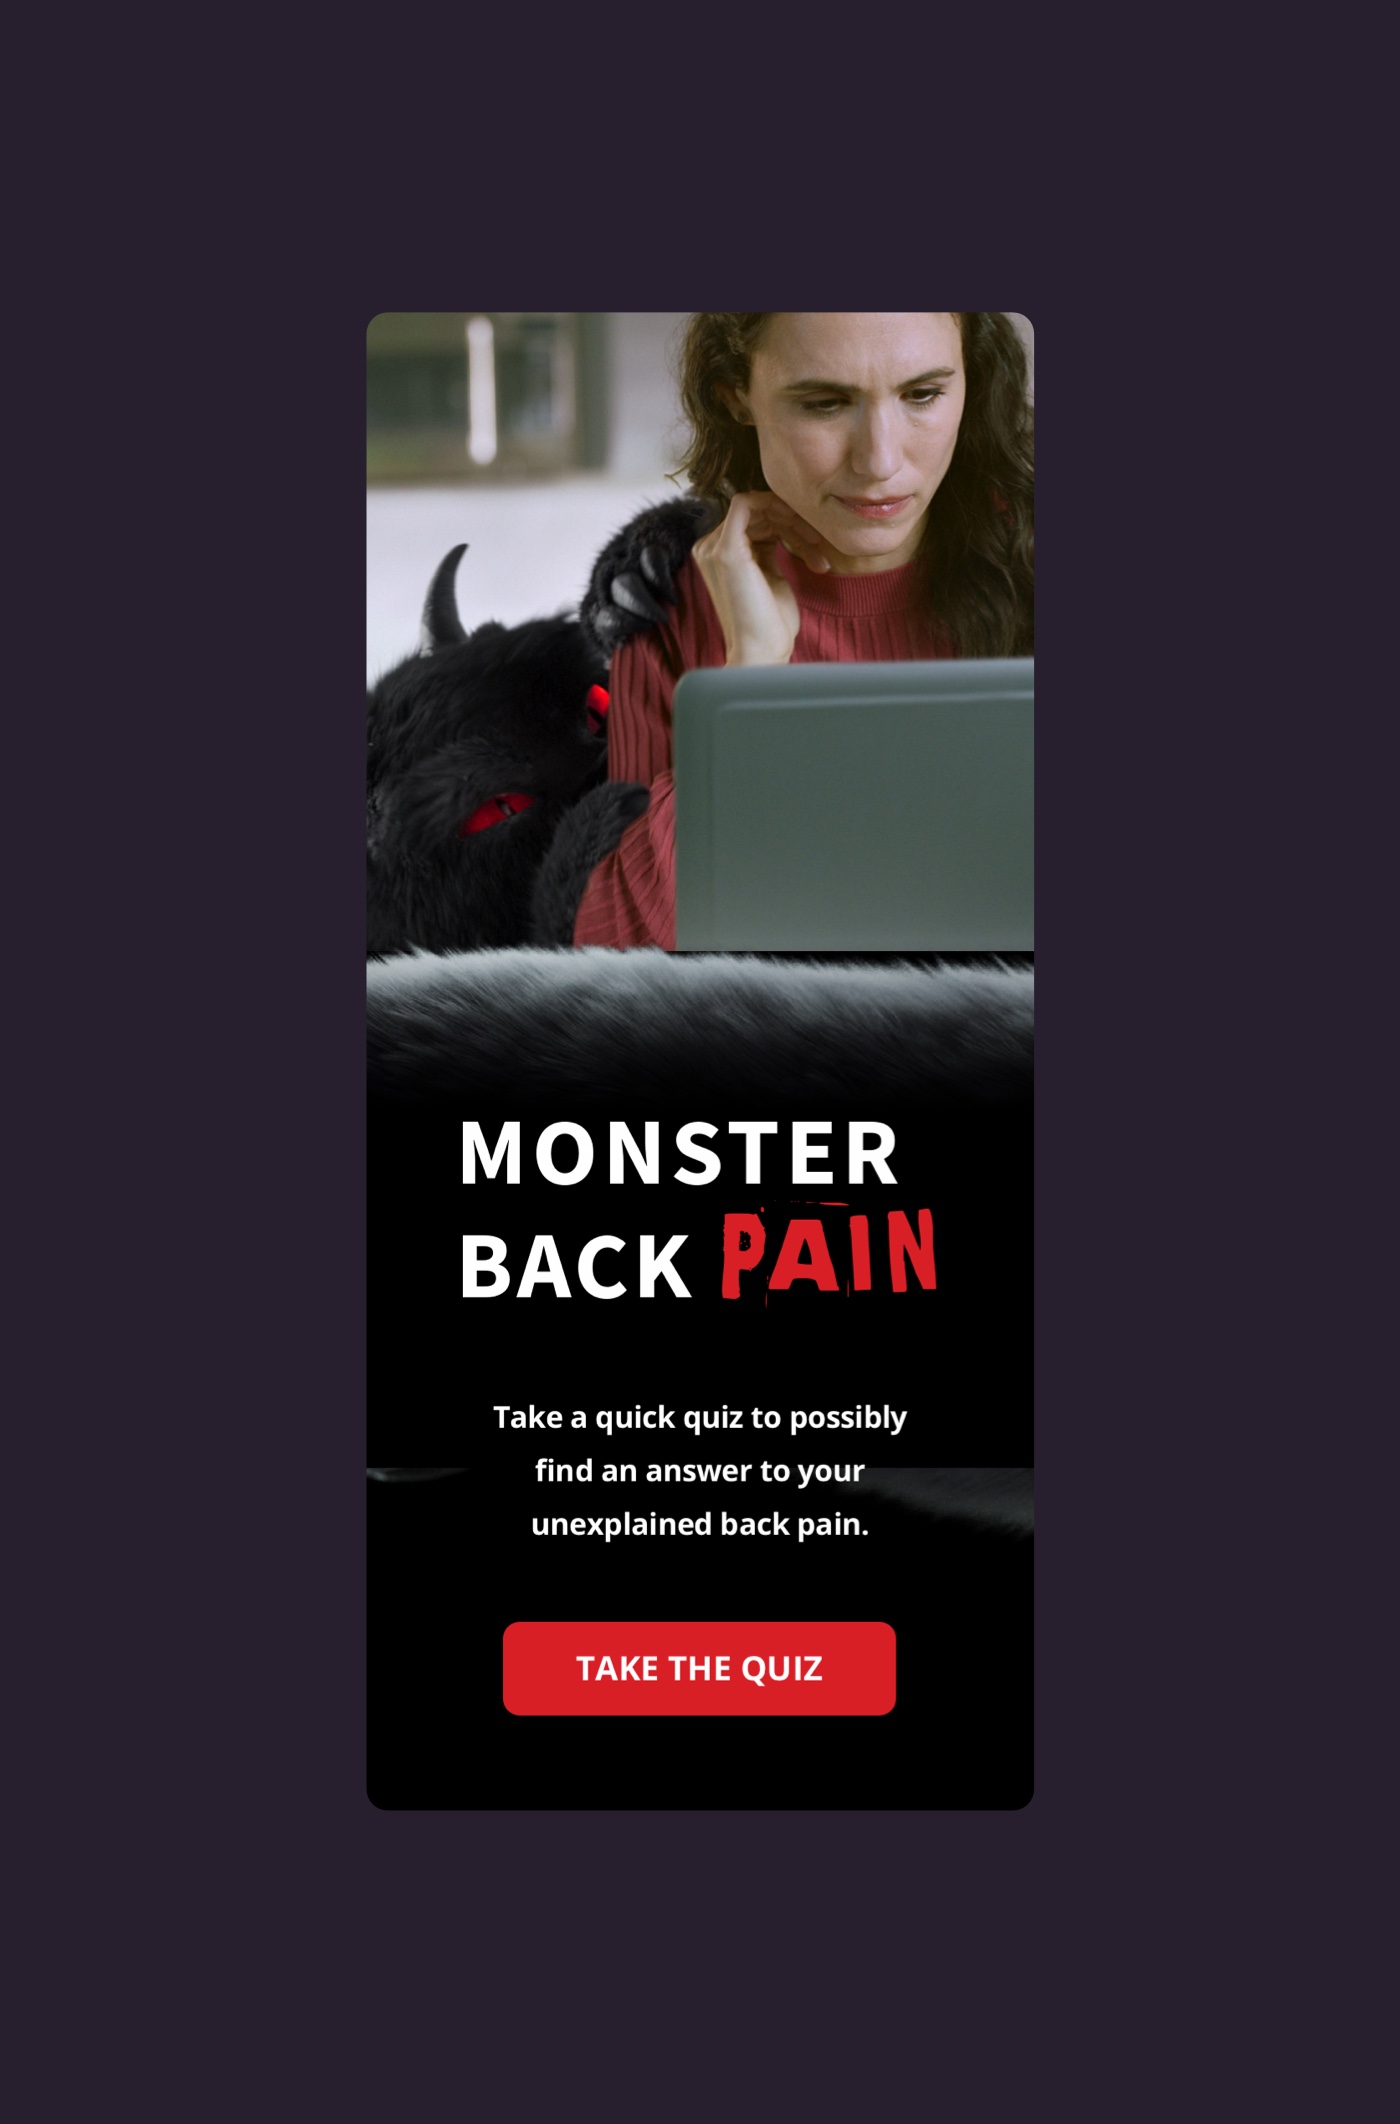 Woman on laptop with back pain monster for an online quiz